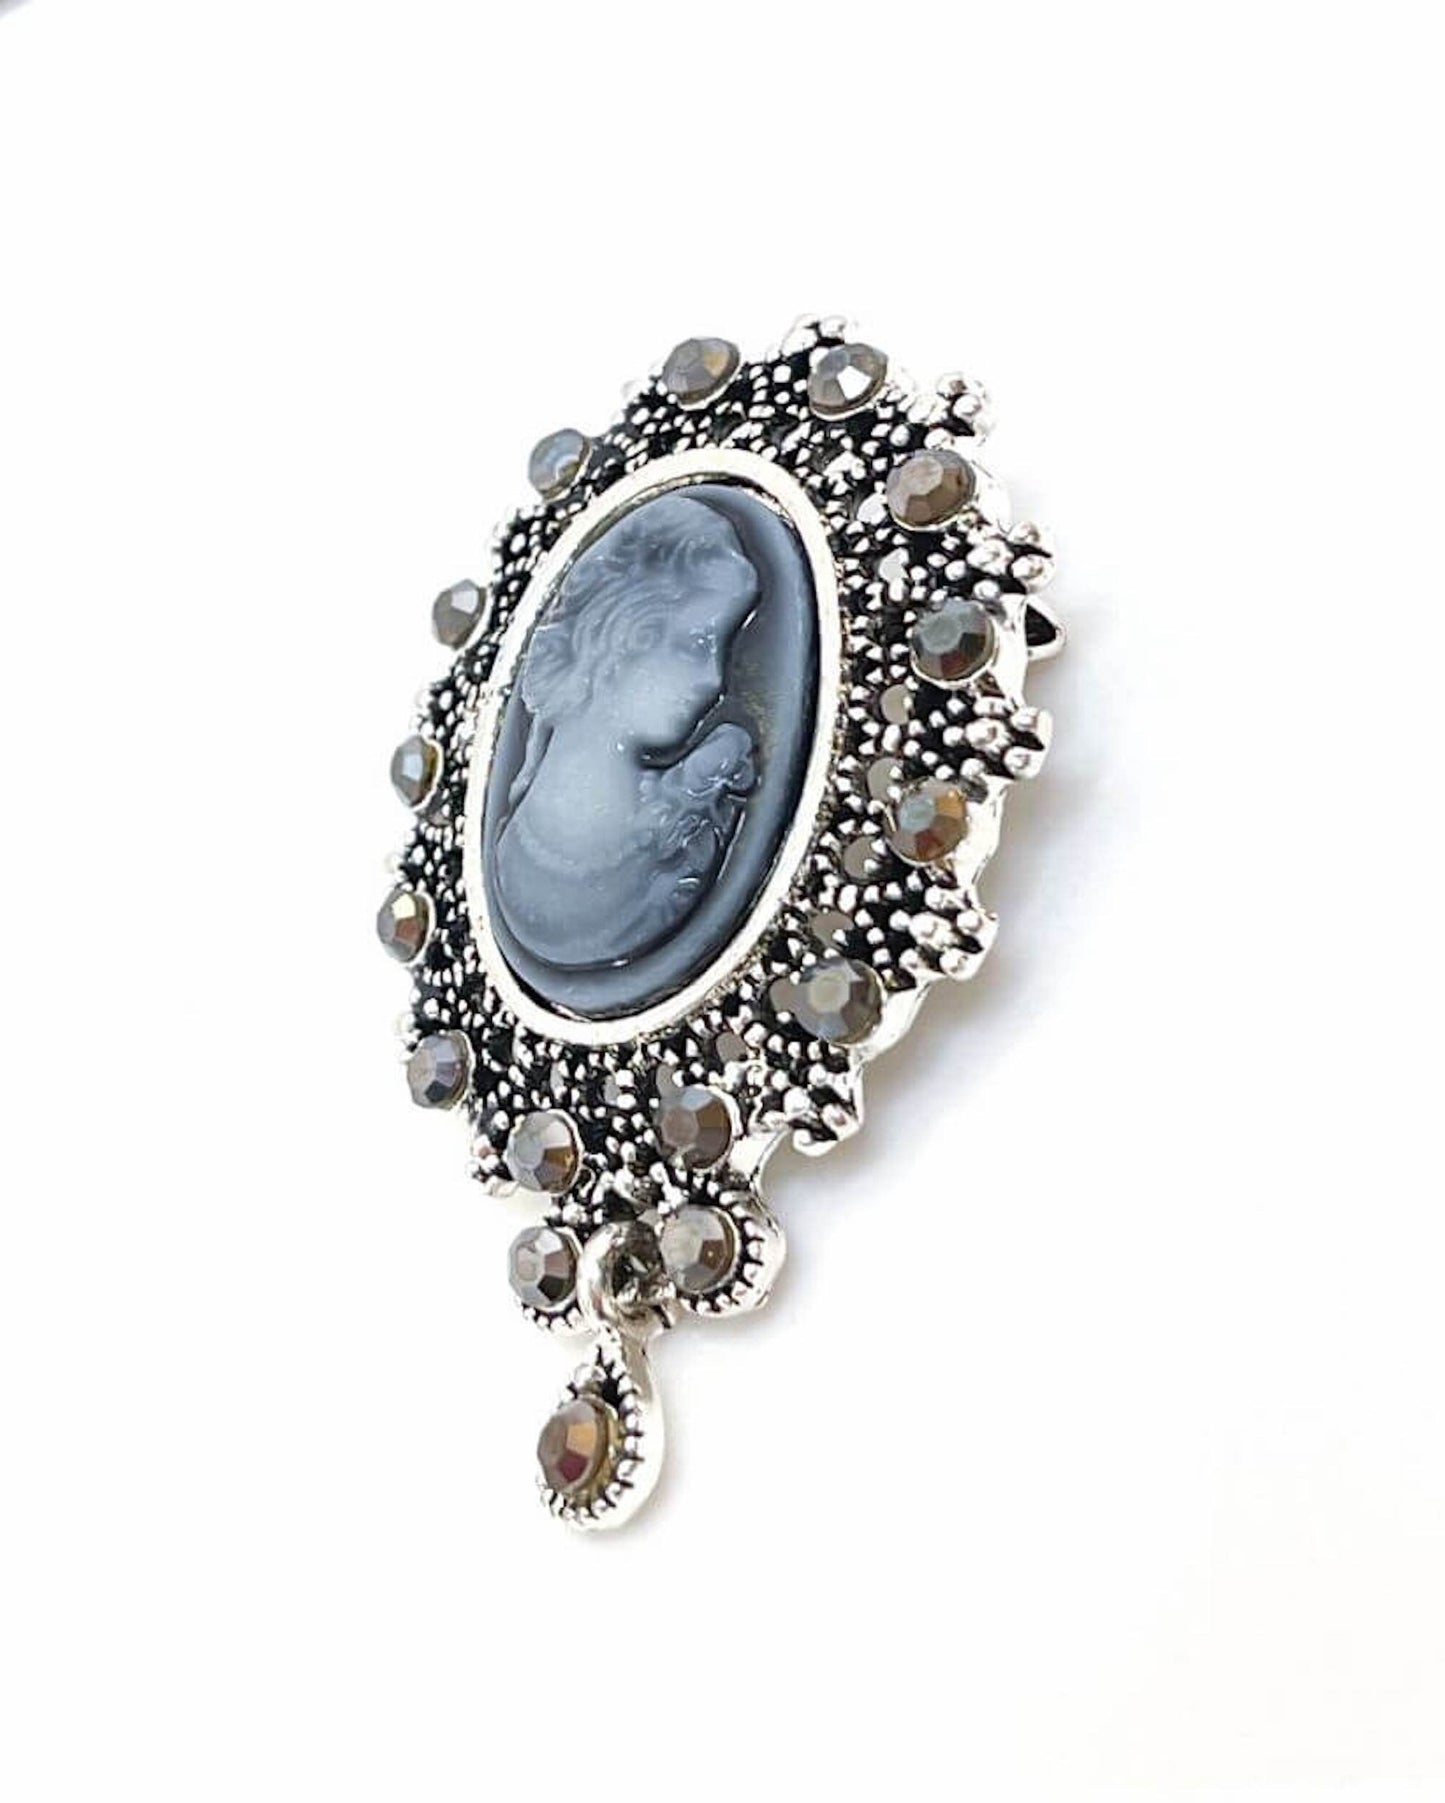 Gorgeous Blue Vintage Cameo Brooch, Victorian Lady Brooch, Crystal Jewelry, Stylish Cameo Pin, Brooches For Women